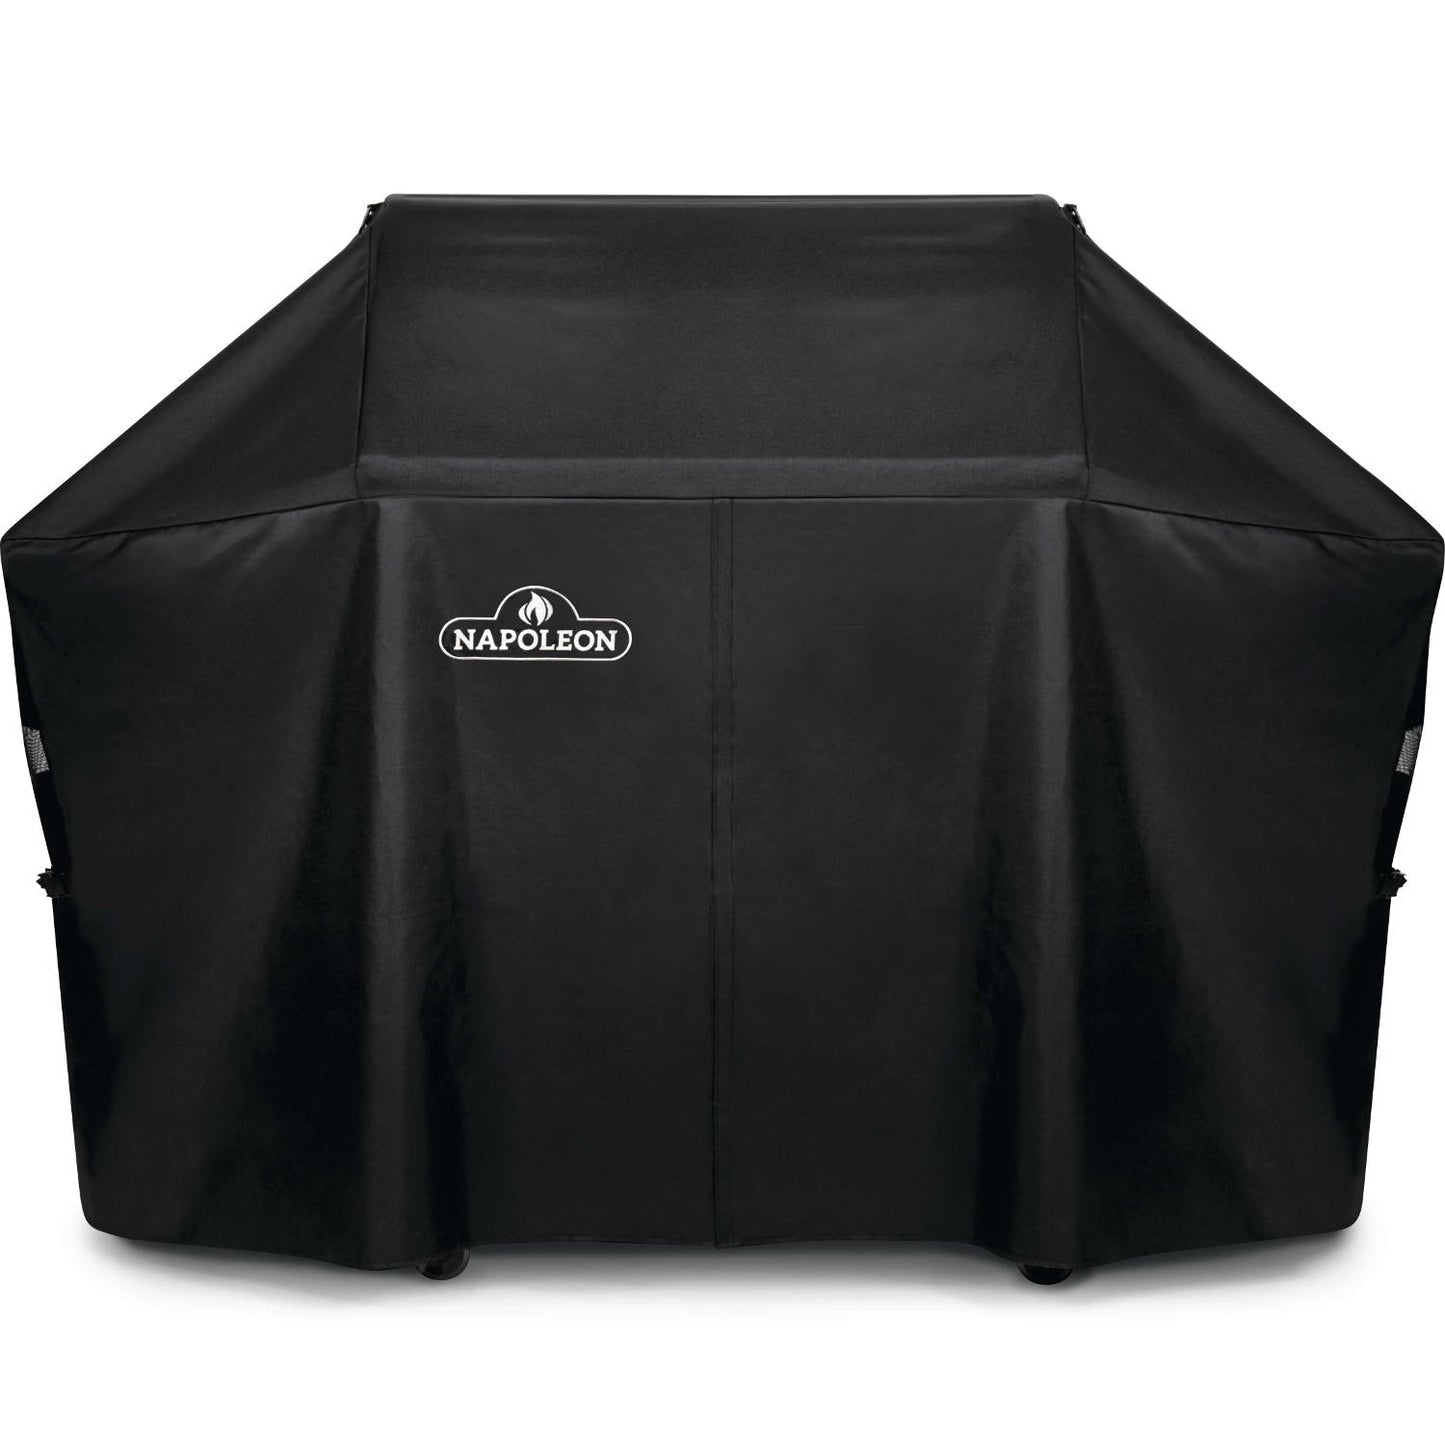 Napoleon Rogue 525 Grill Cover & Rotisserie Kit Bundle